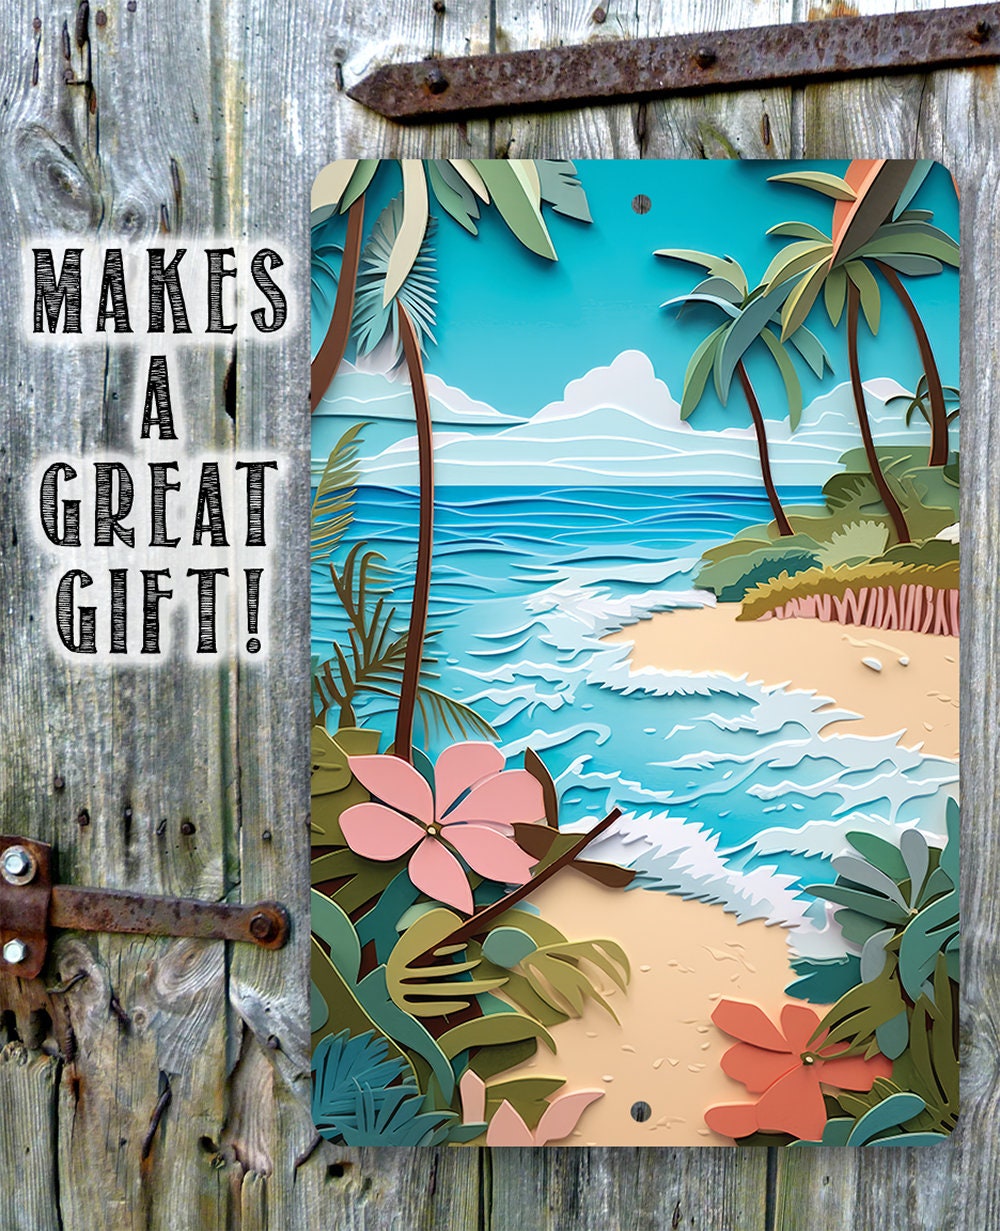 Tin - Beach Dreams - Beach House and Summer Surfing Decor - Durable Metal Sign - 8" x 12" or 12" x 18" Use Indoor/Outdoor -Housewarming Gift